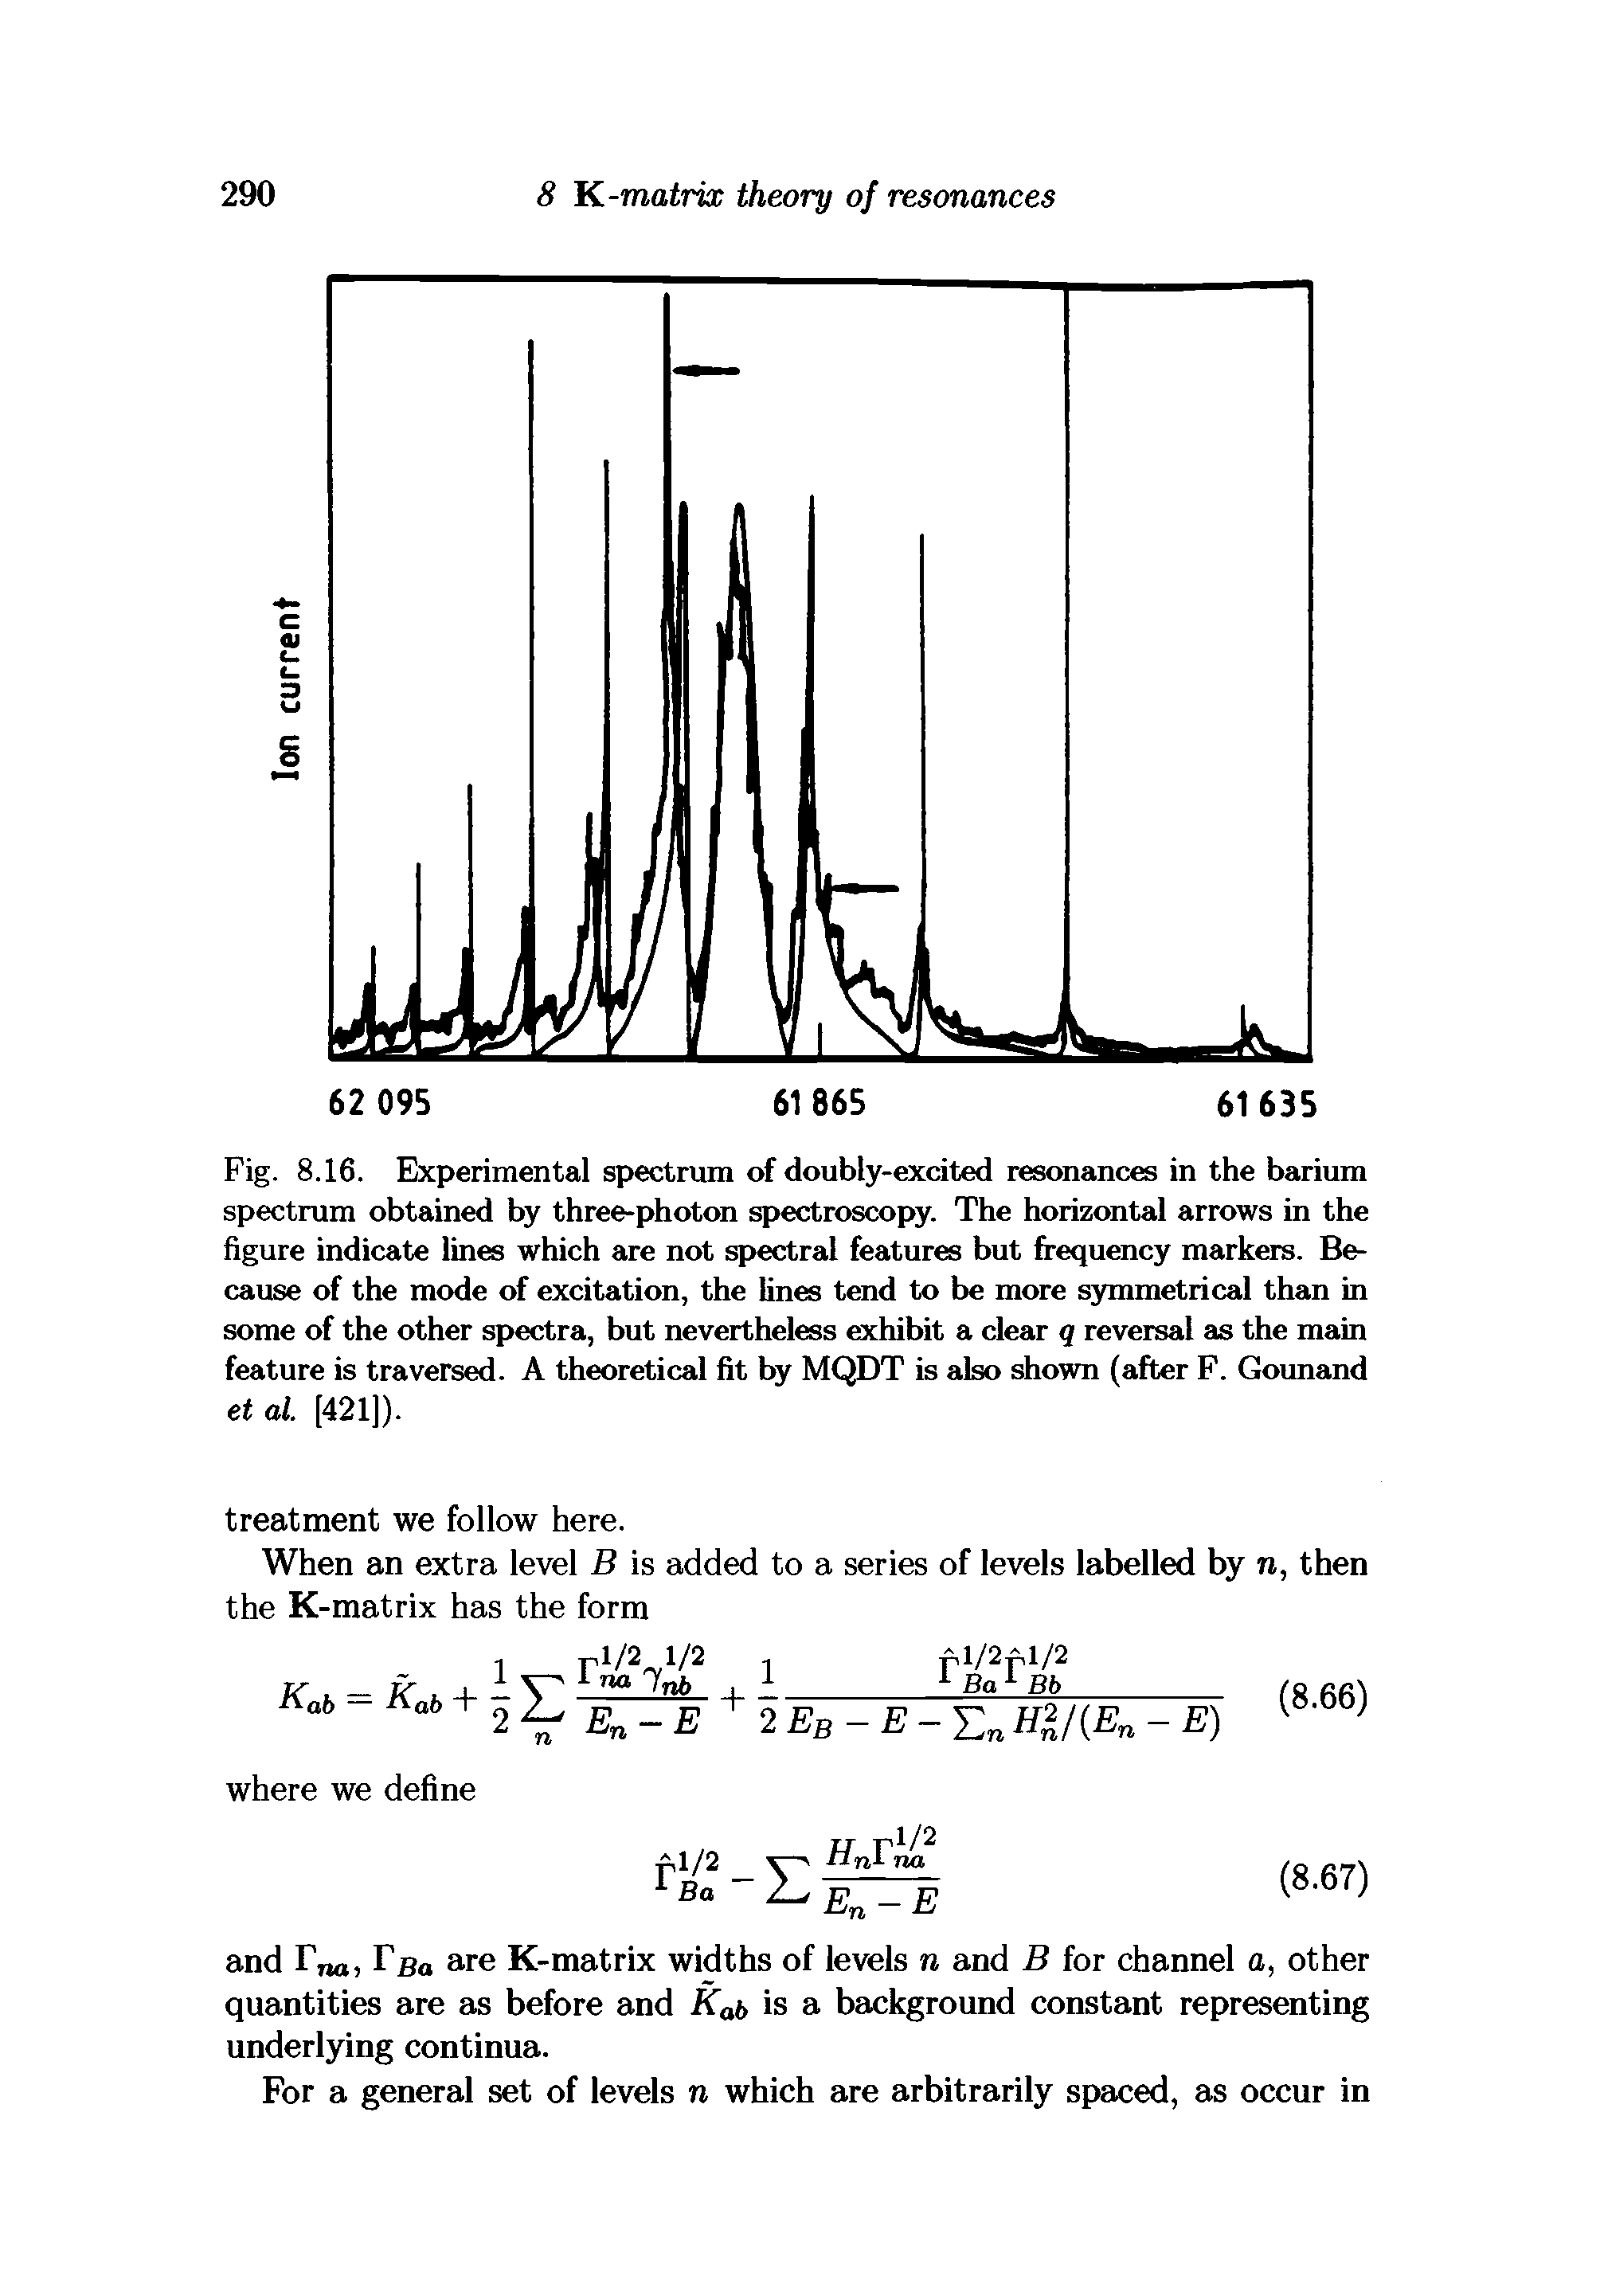 Fig. 8.16. Experimental spectrum of doubly-excited resonances in the barium spectrum obtained by three-photon spectroscopy. The horizontal arrows in the figure indicate lines which are not spectral features but frequency markers. Because of the mode of excitation, the lines tend to be more symmetrical than in some of the other spectra, but nevertheless exhibit a clear q reversal as the main feature is traversed. A theoretical fit by MQDT is also shown (after F. Gounand et al. [421]).